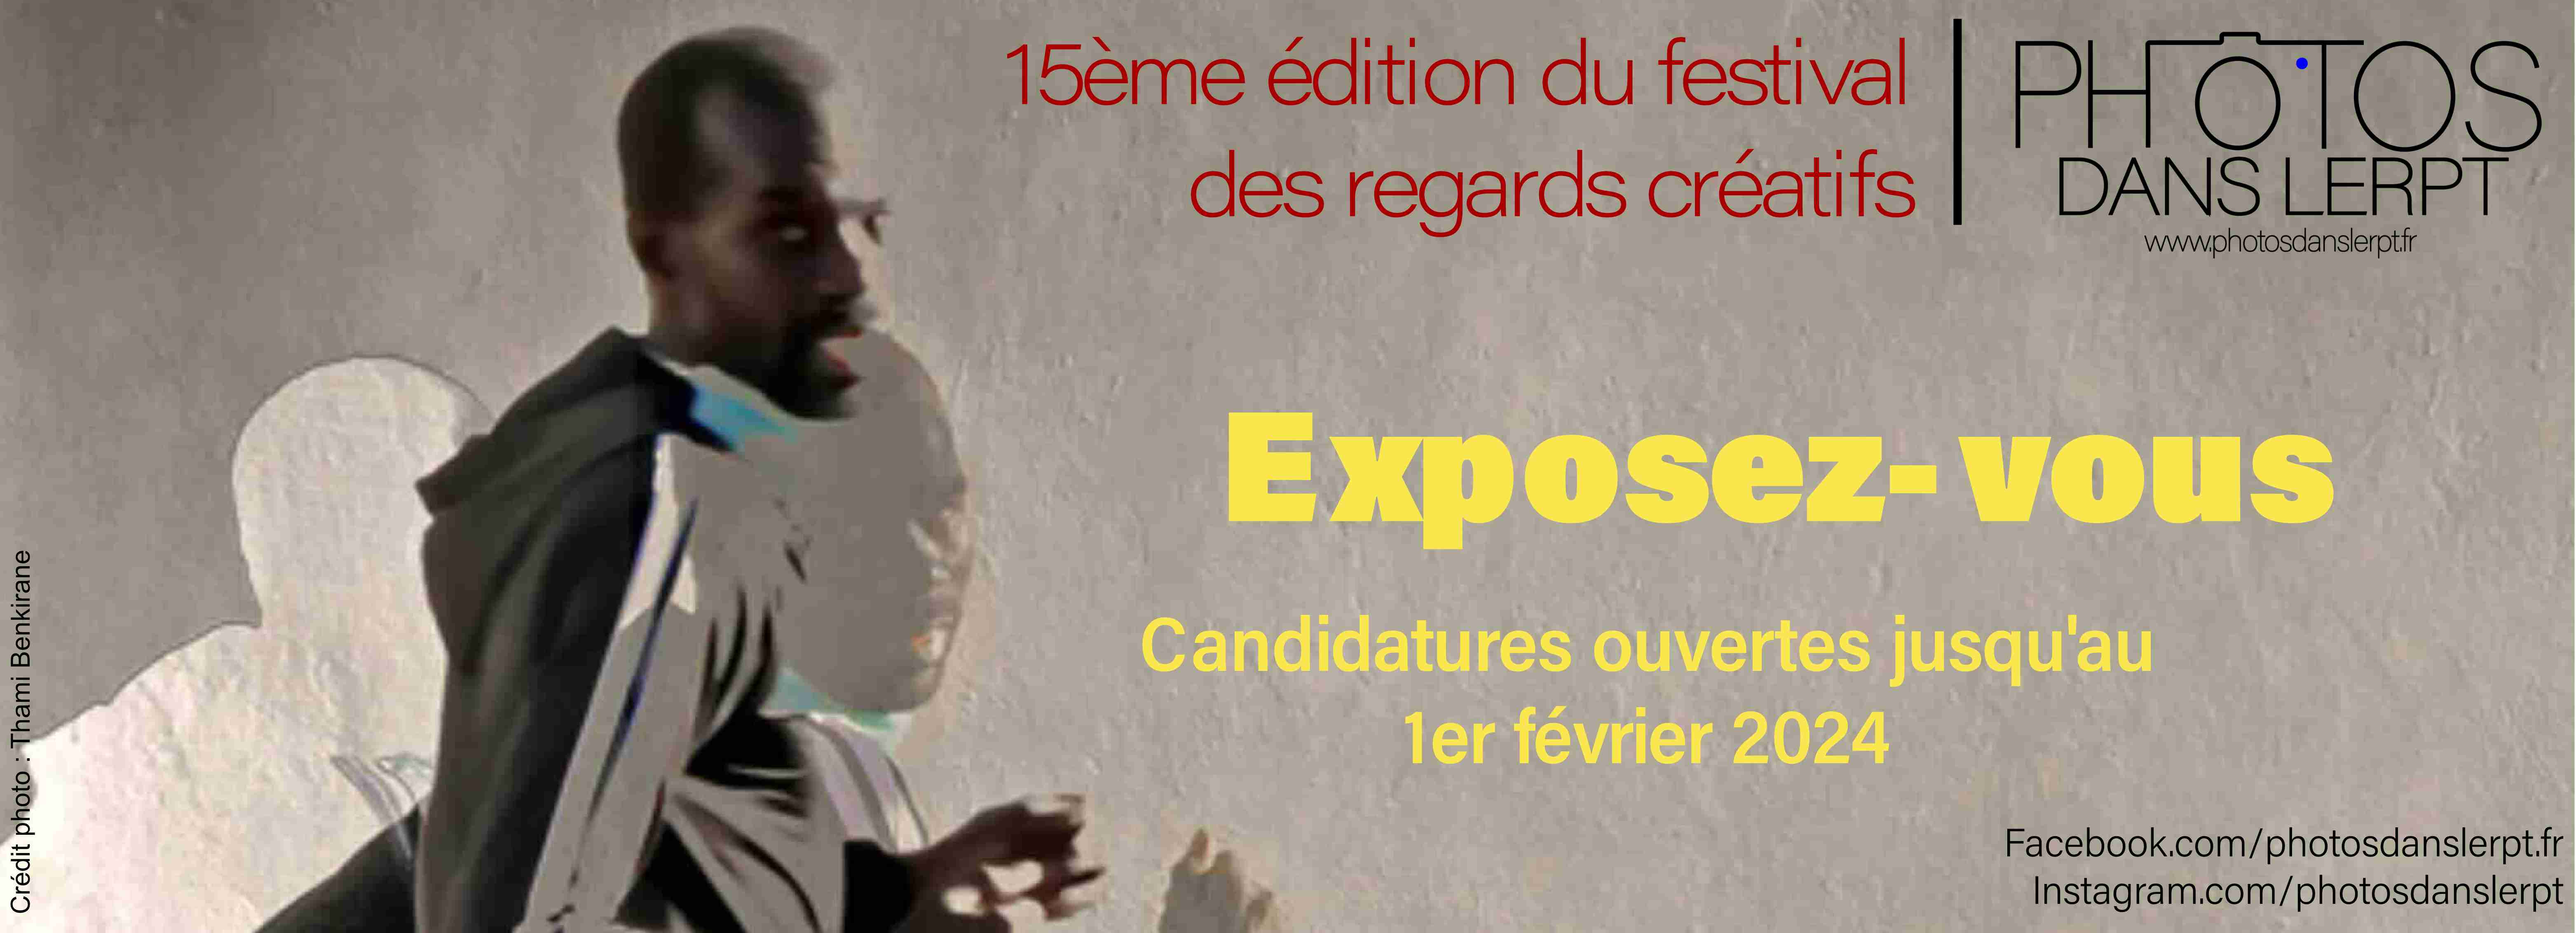 Annonce candidature